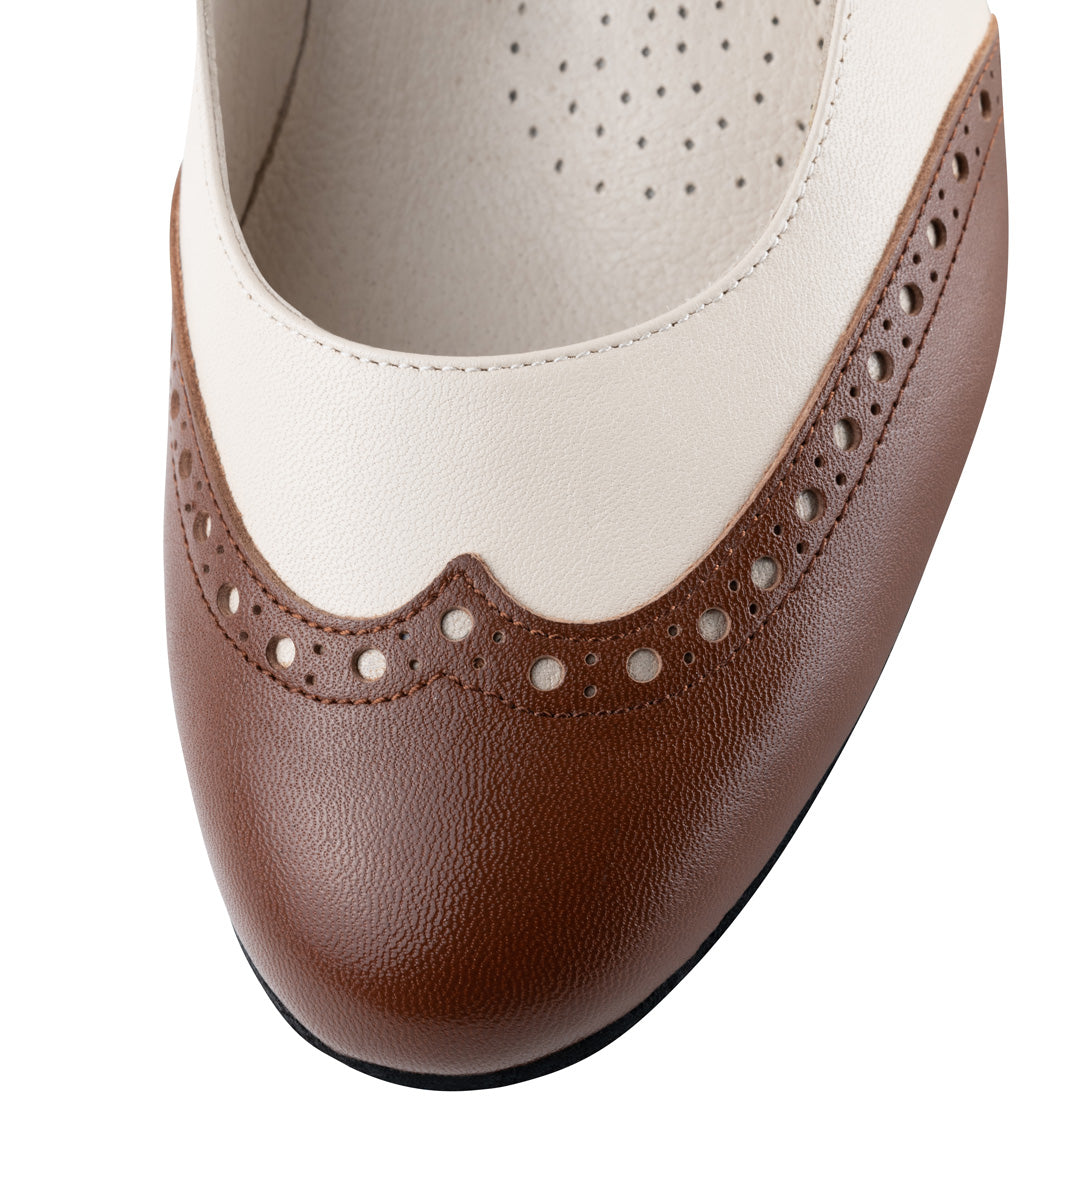 Werner Kern Emma Ladies Swing Shoes in Brown and Beige Leather or Black and White Leather with a Single Strap